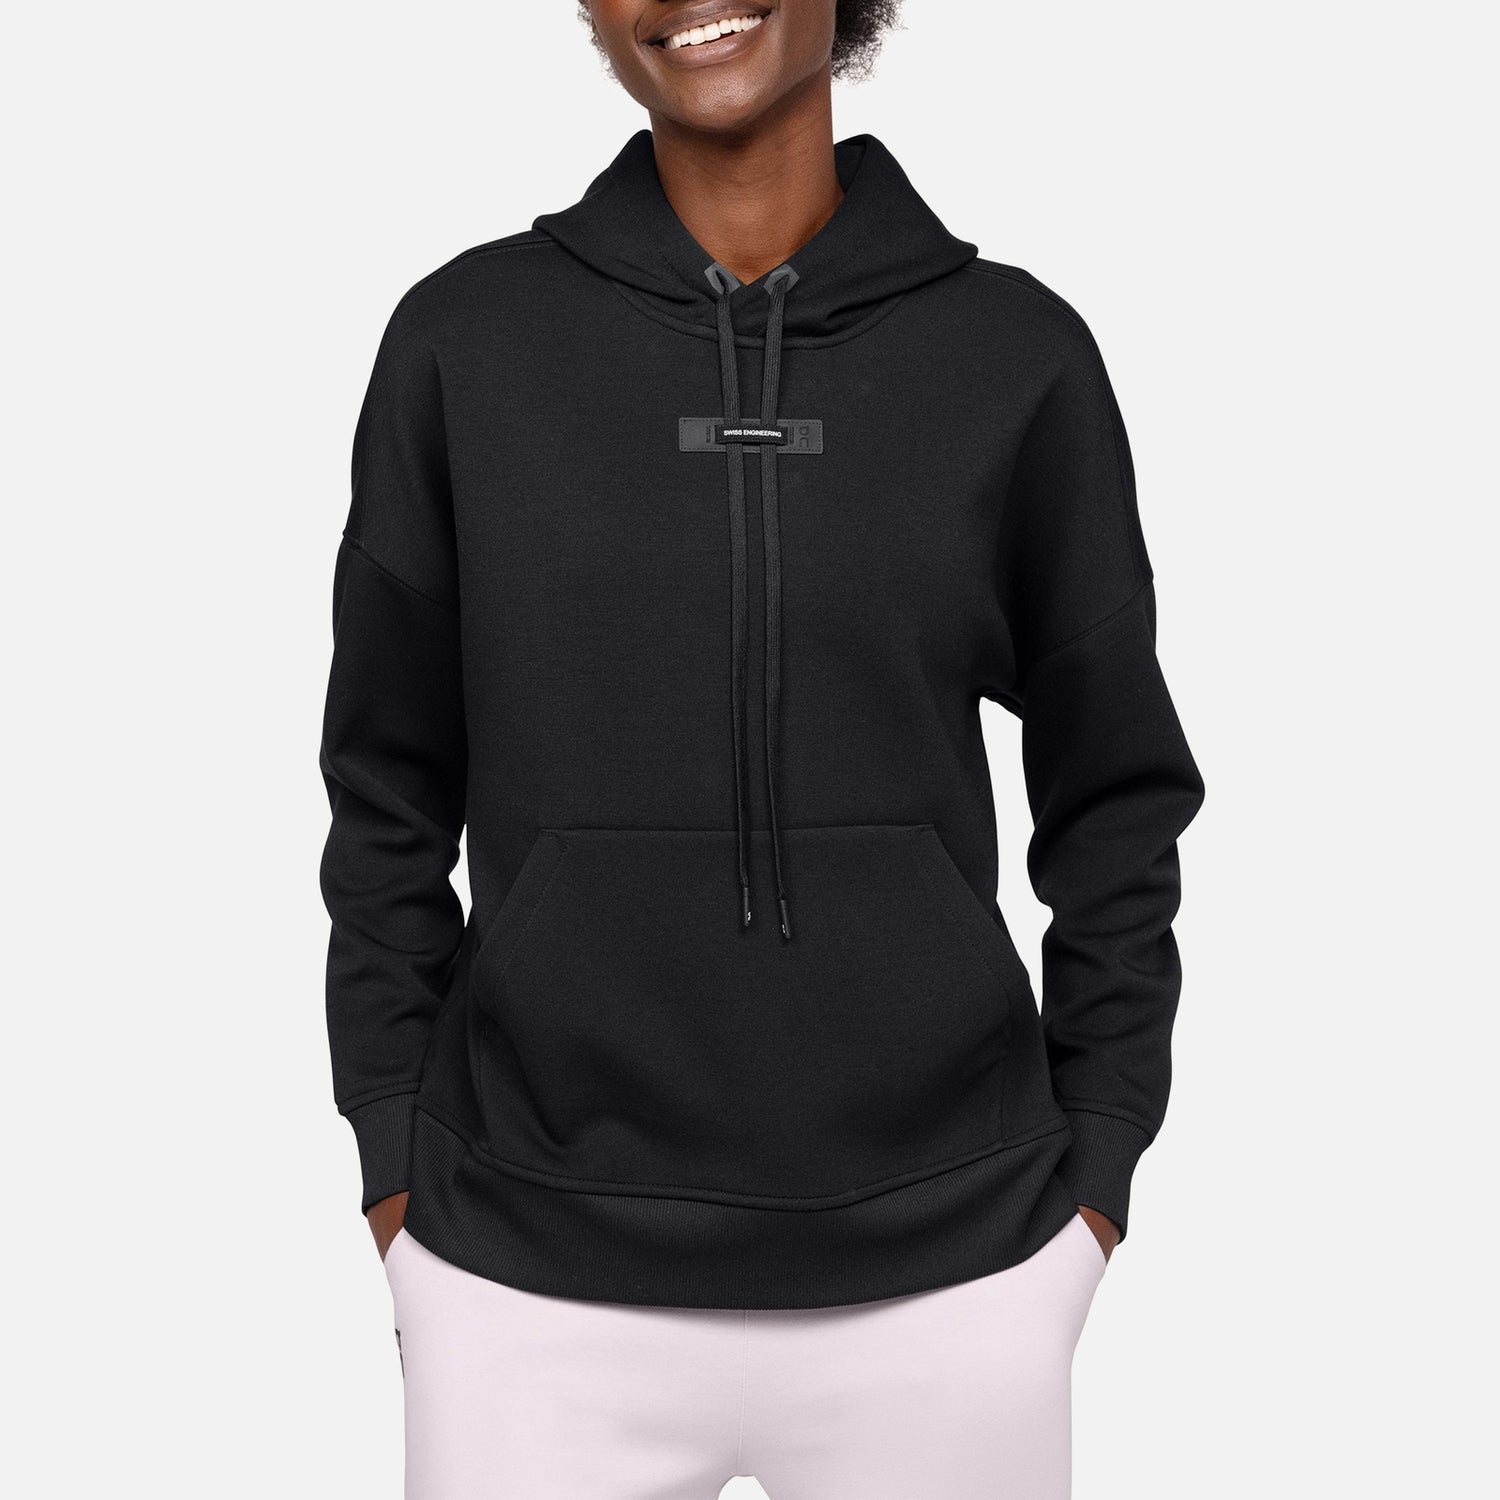 ON Stretch Jersey Hoodie - XS